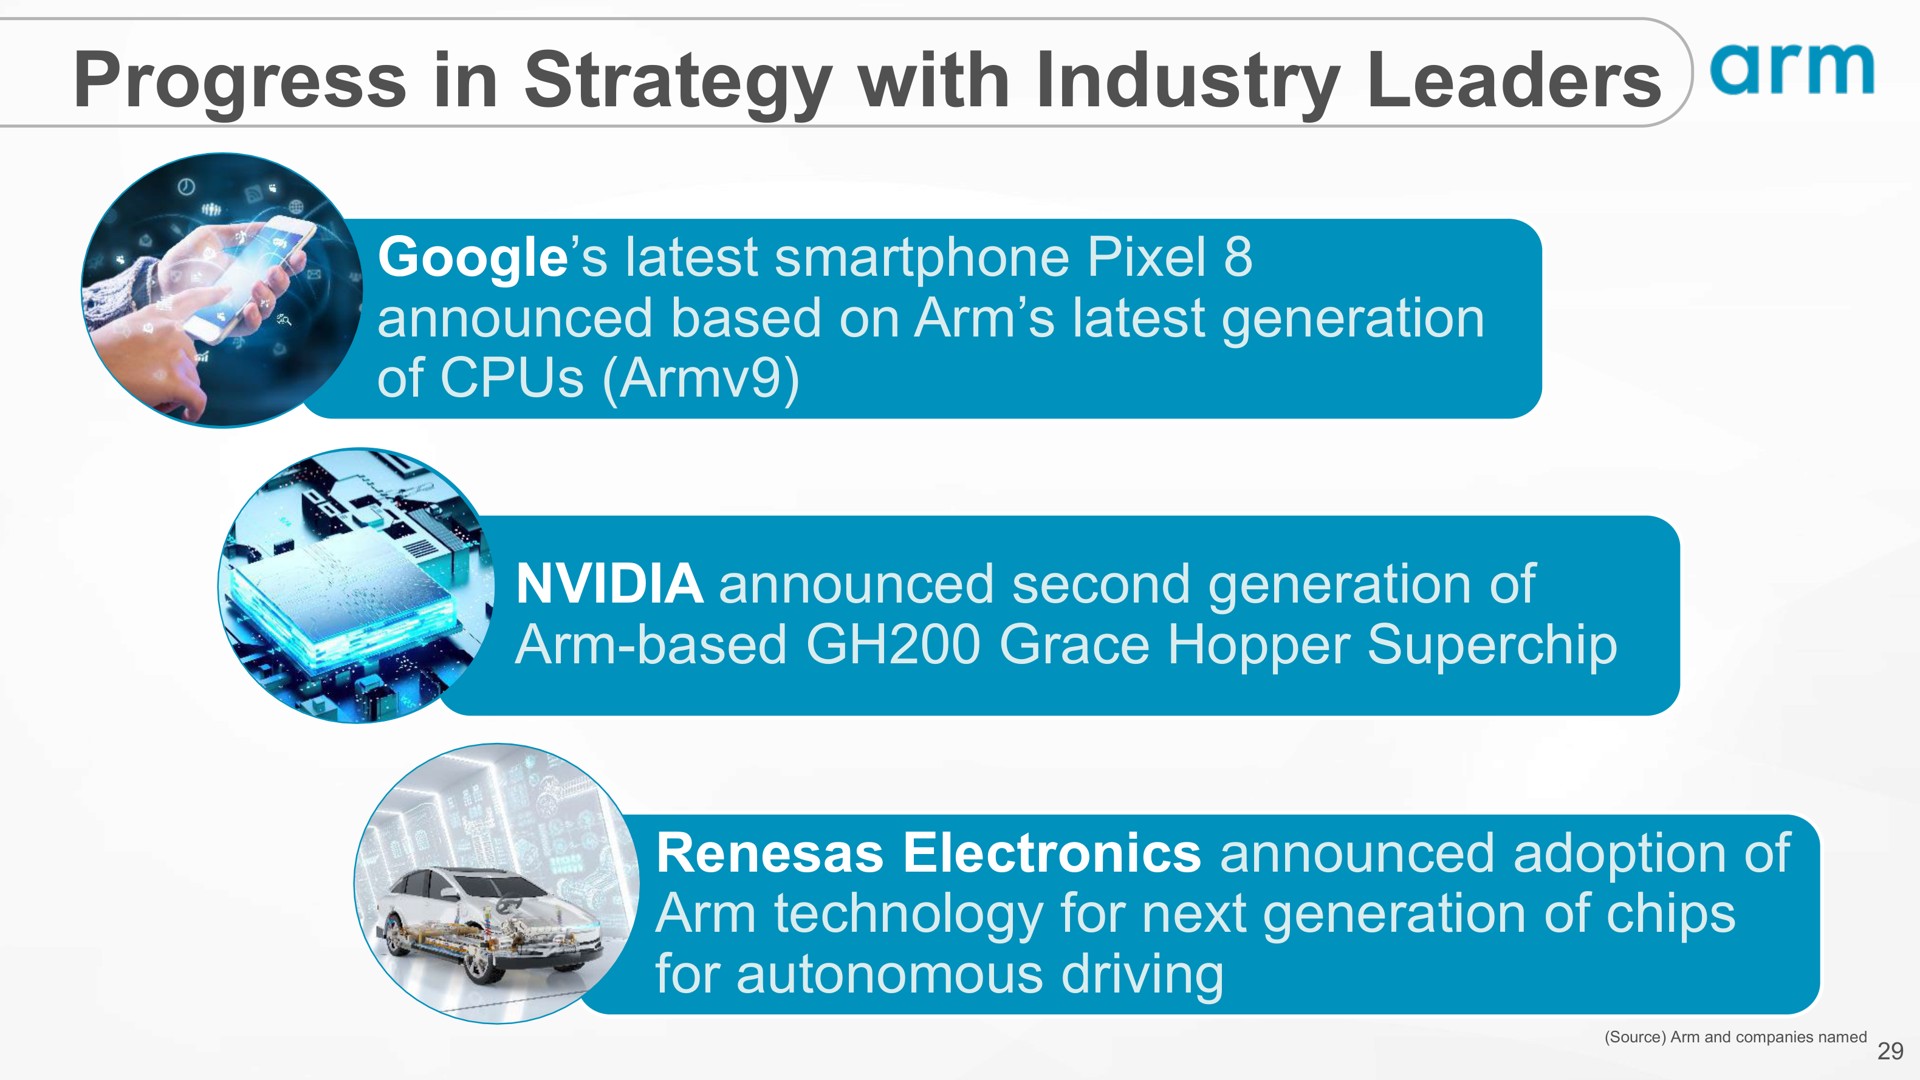 progress in strategy with industry leaders arm | SoftBank